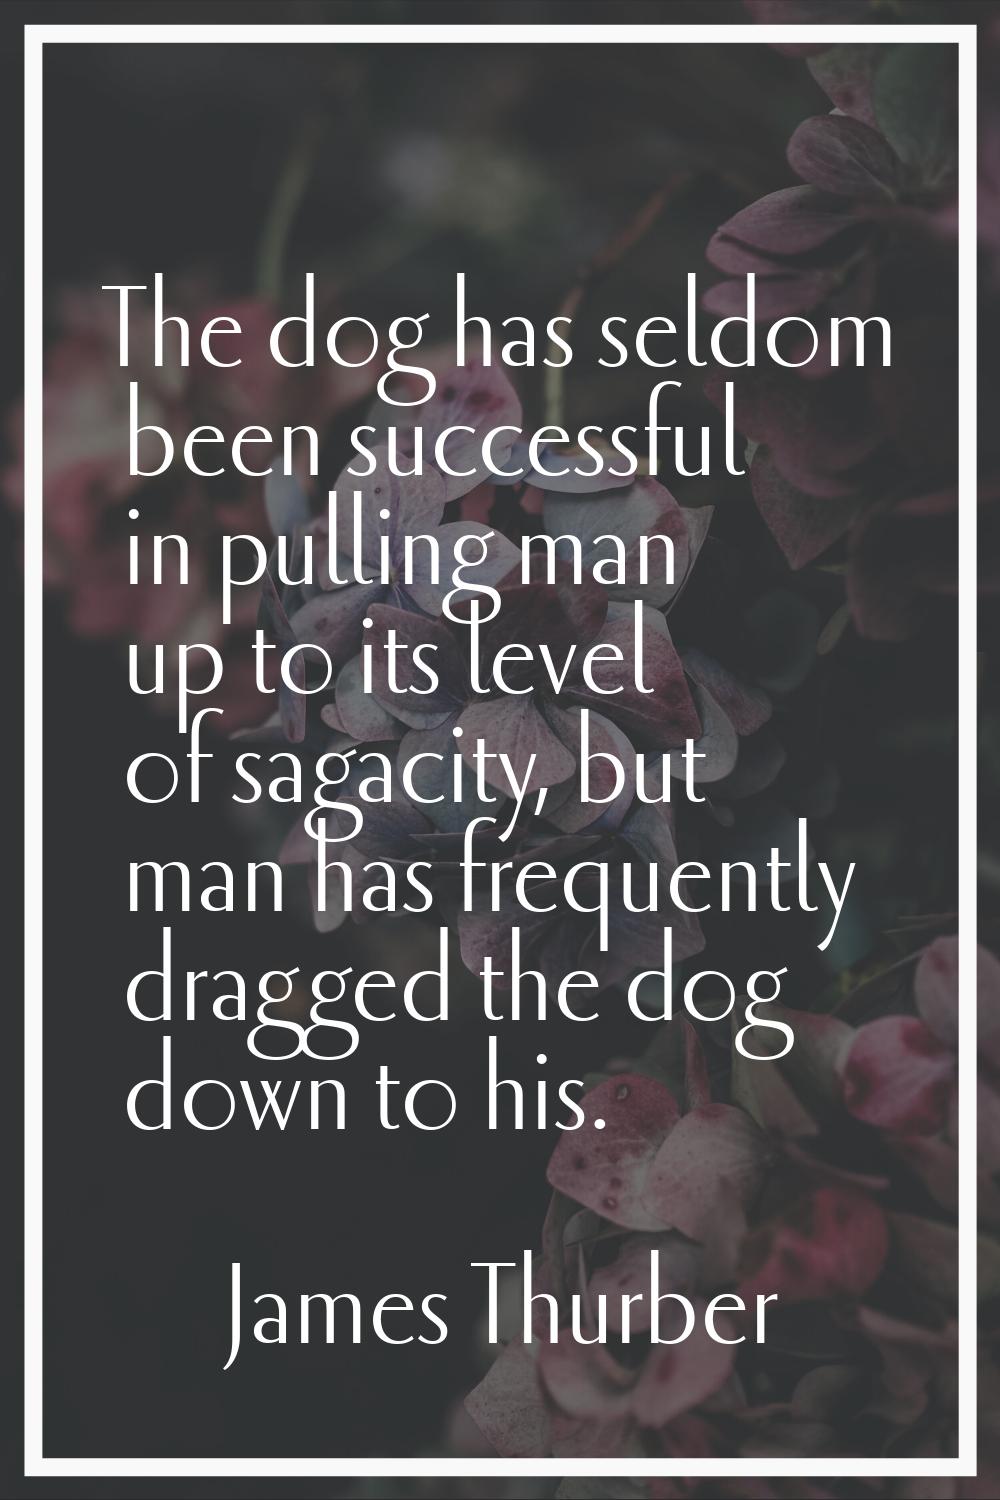 The dog has seldom been successful in pulling man up to its level of sagacity, but man has frequent